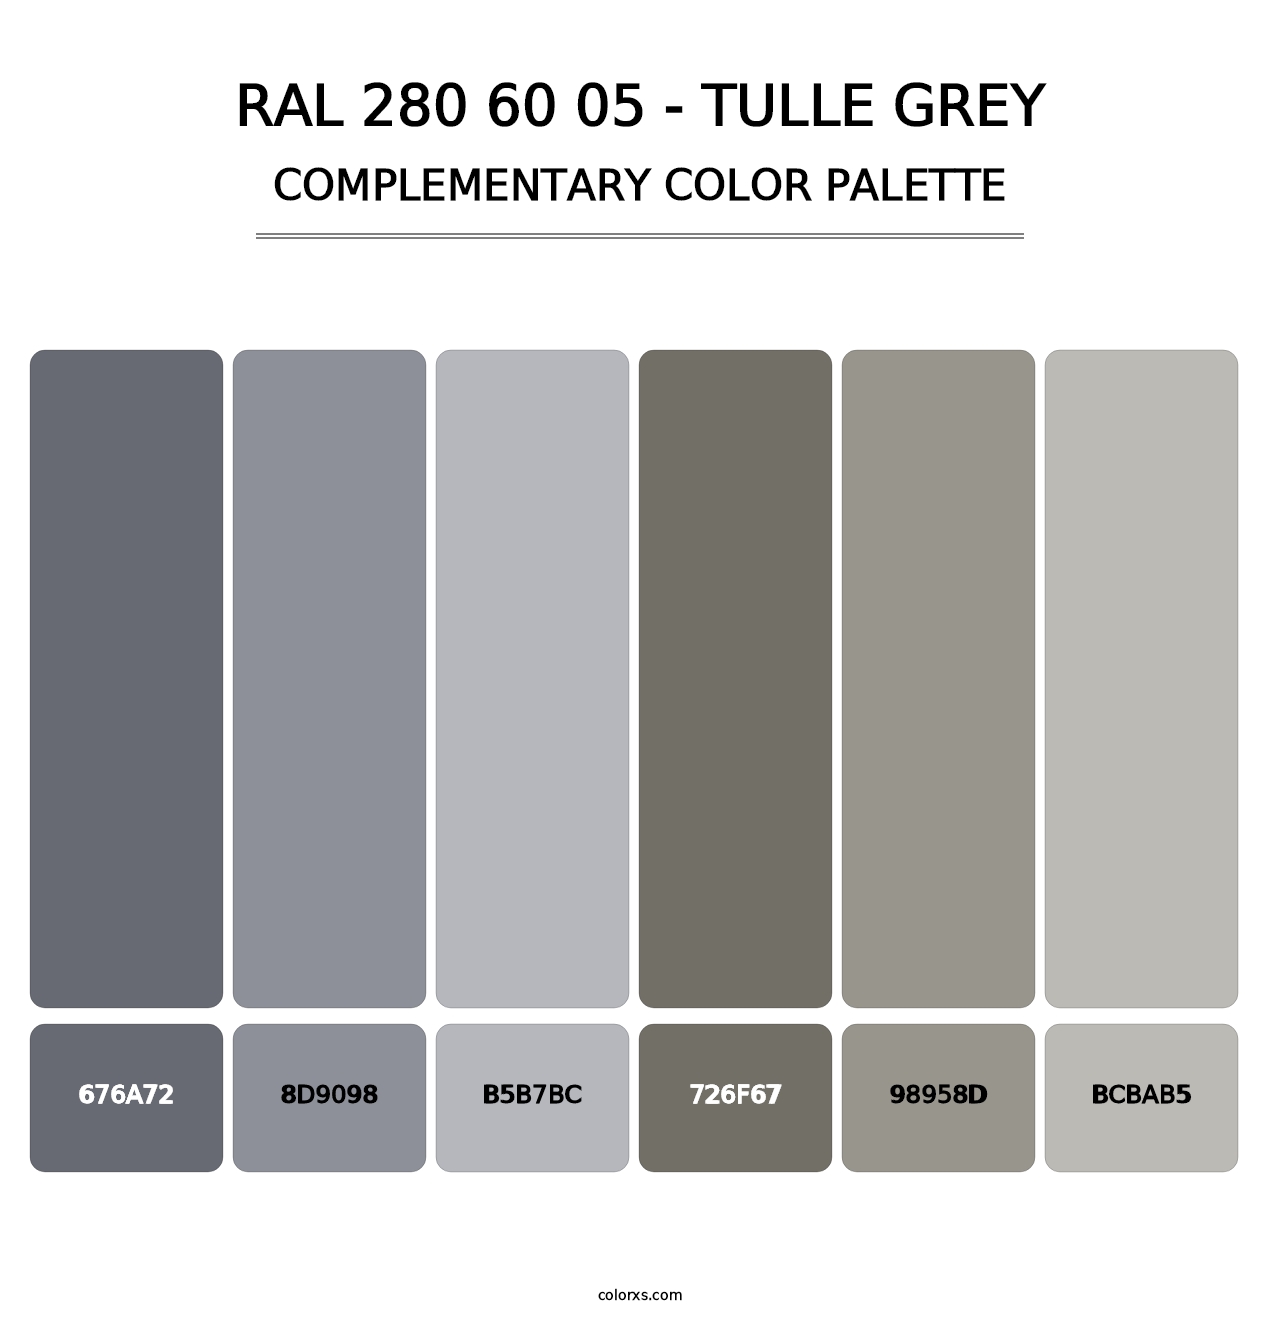 RAL 280 60 05 - Tulle Grey - Complementary Color Palette